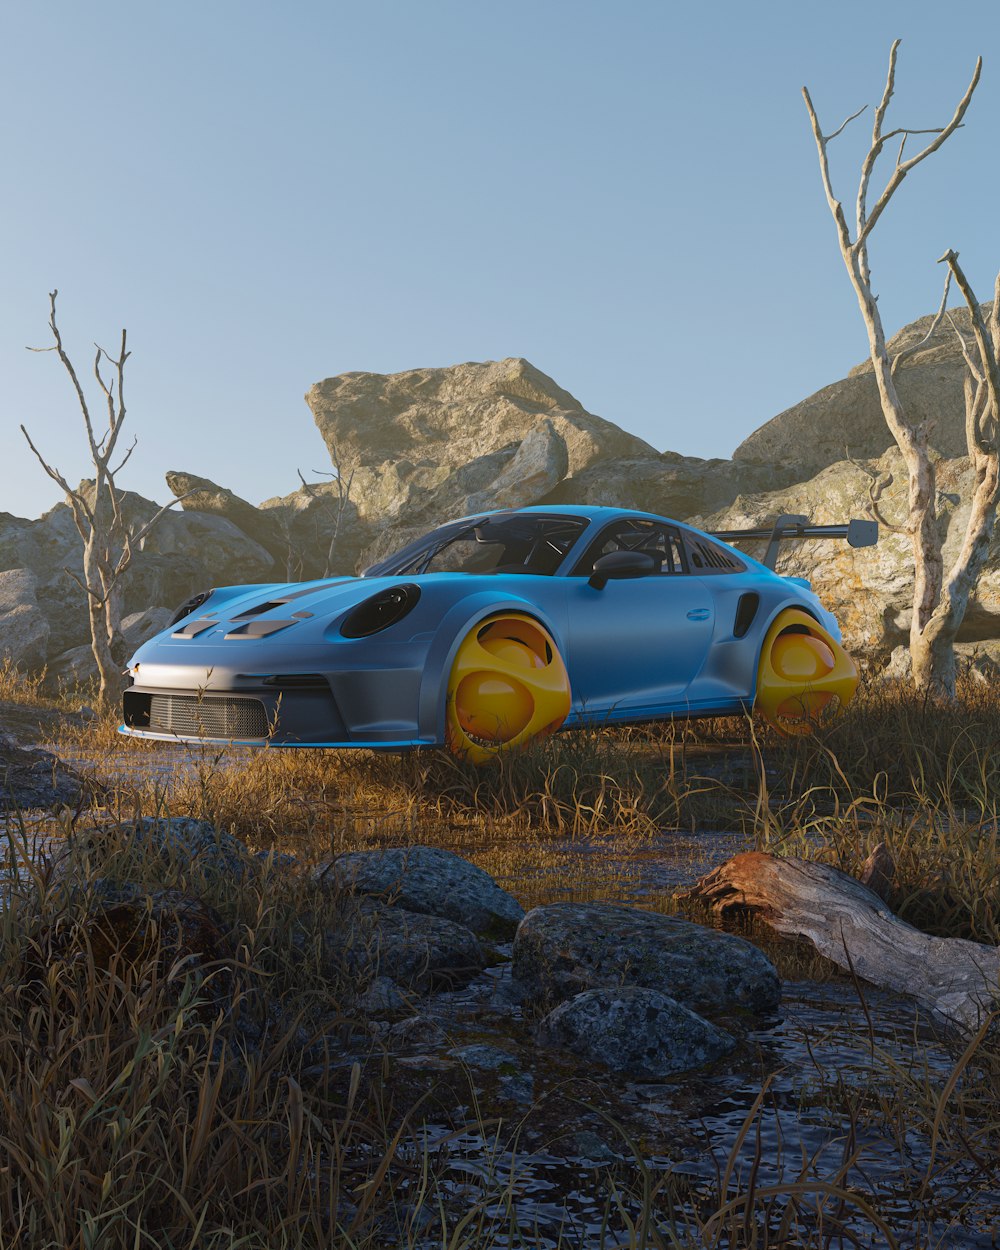 a blue sports car parked in a rocky area